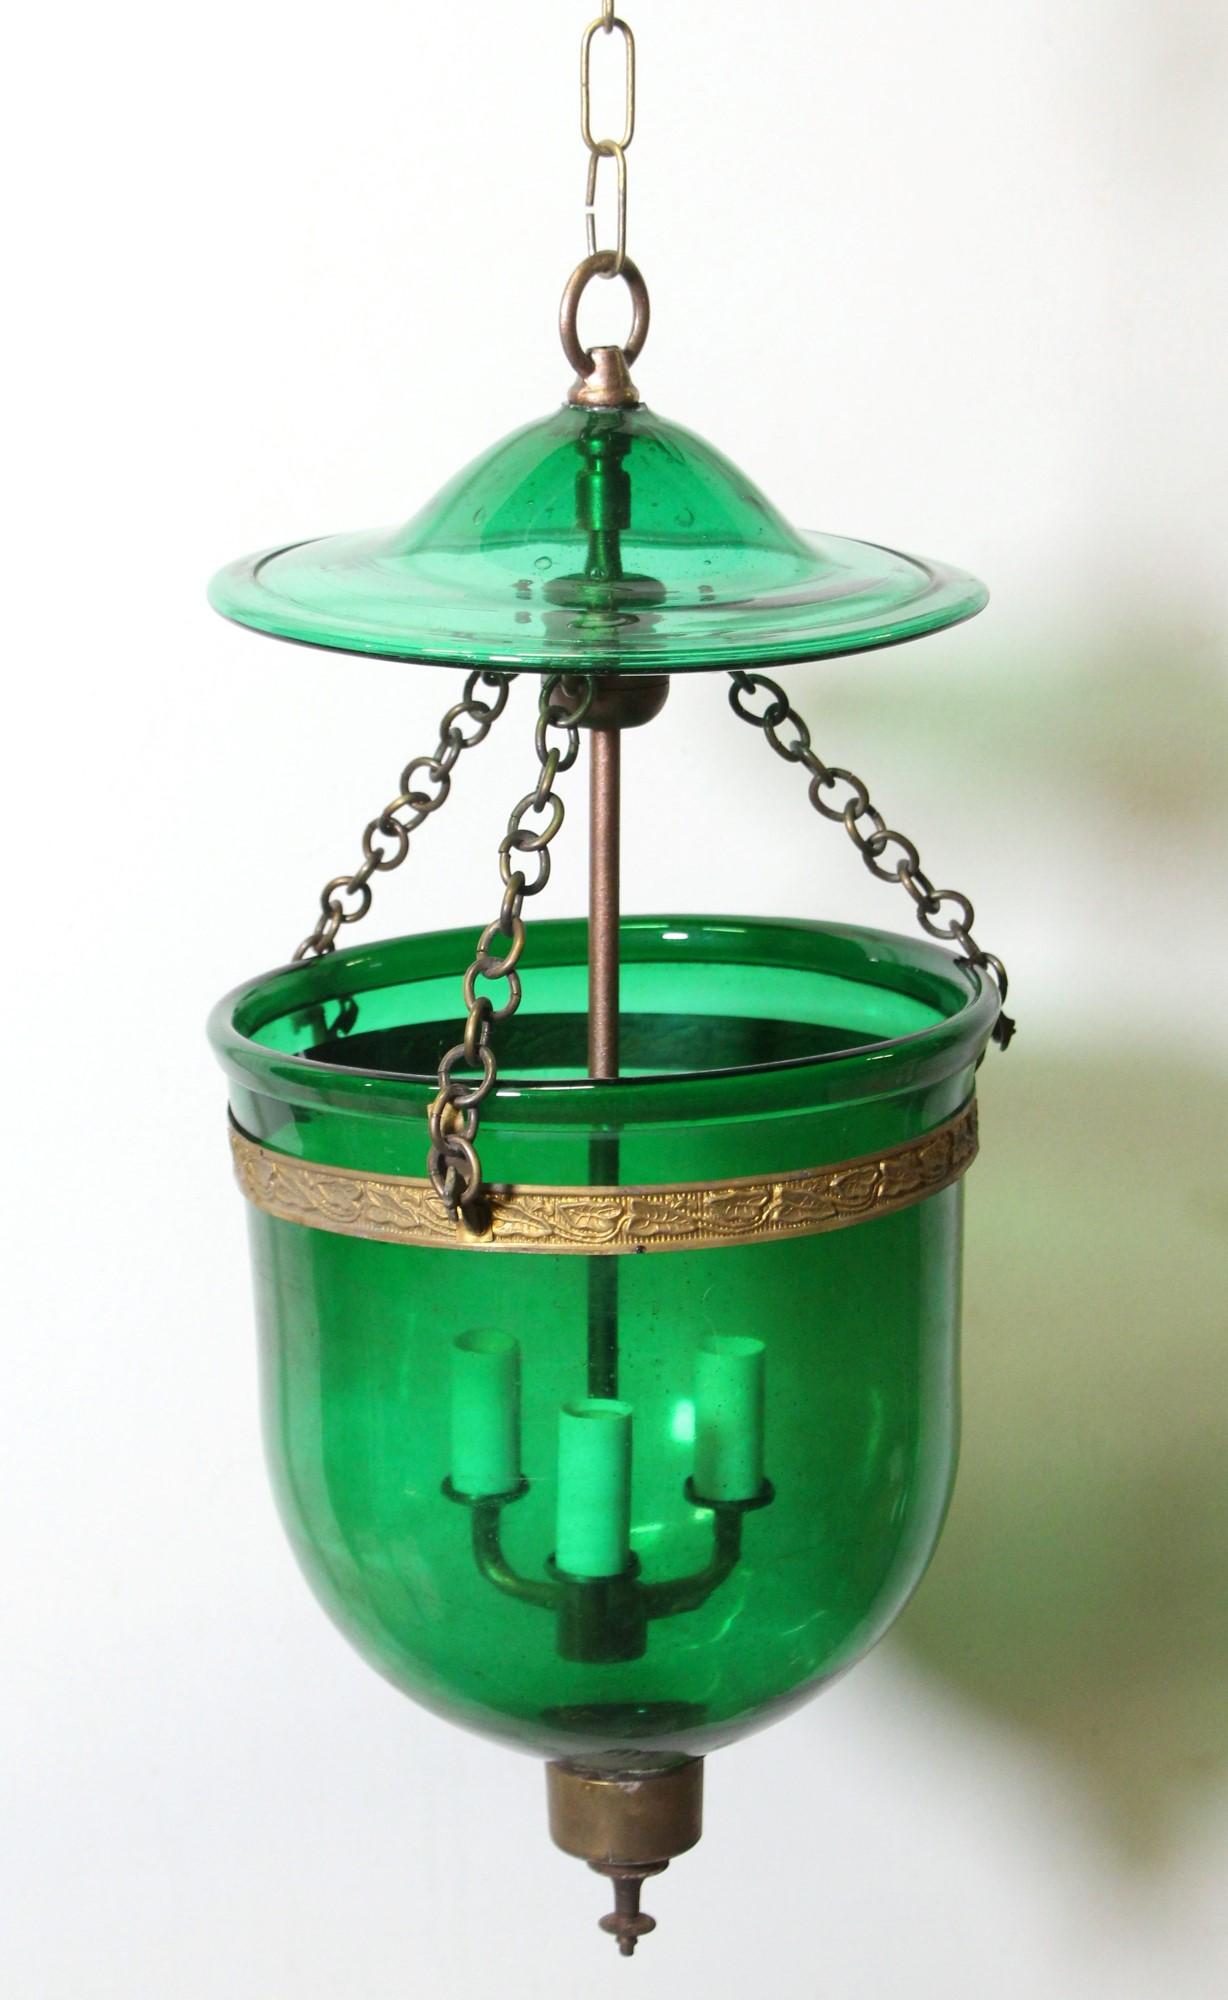 Antique original hand blown green crystal bell jar pendant light with brass hardware and a matching lid. Made in Belgium by Val Saint Lambert. Stamped 